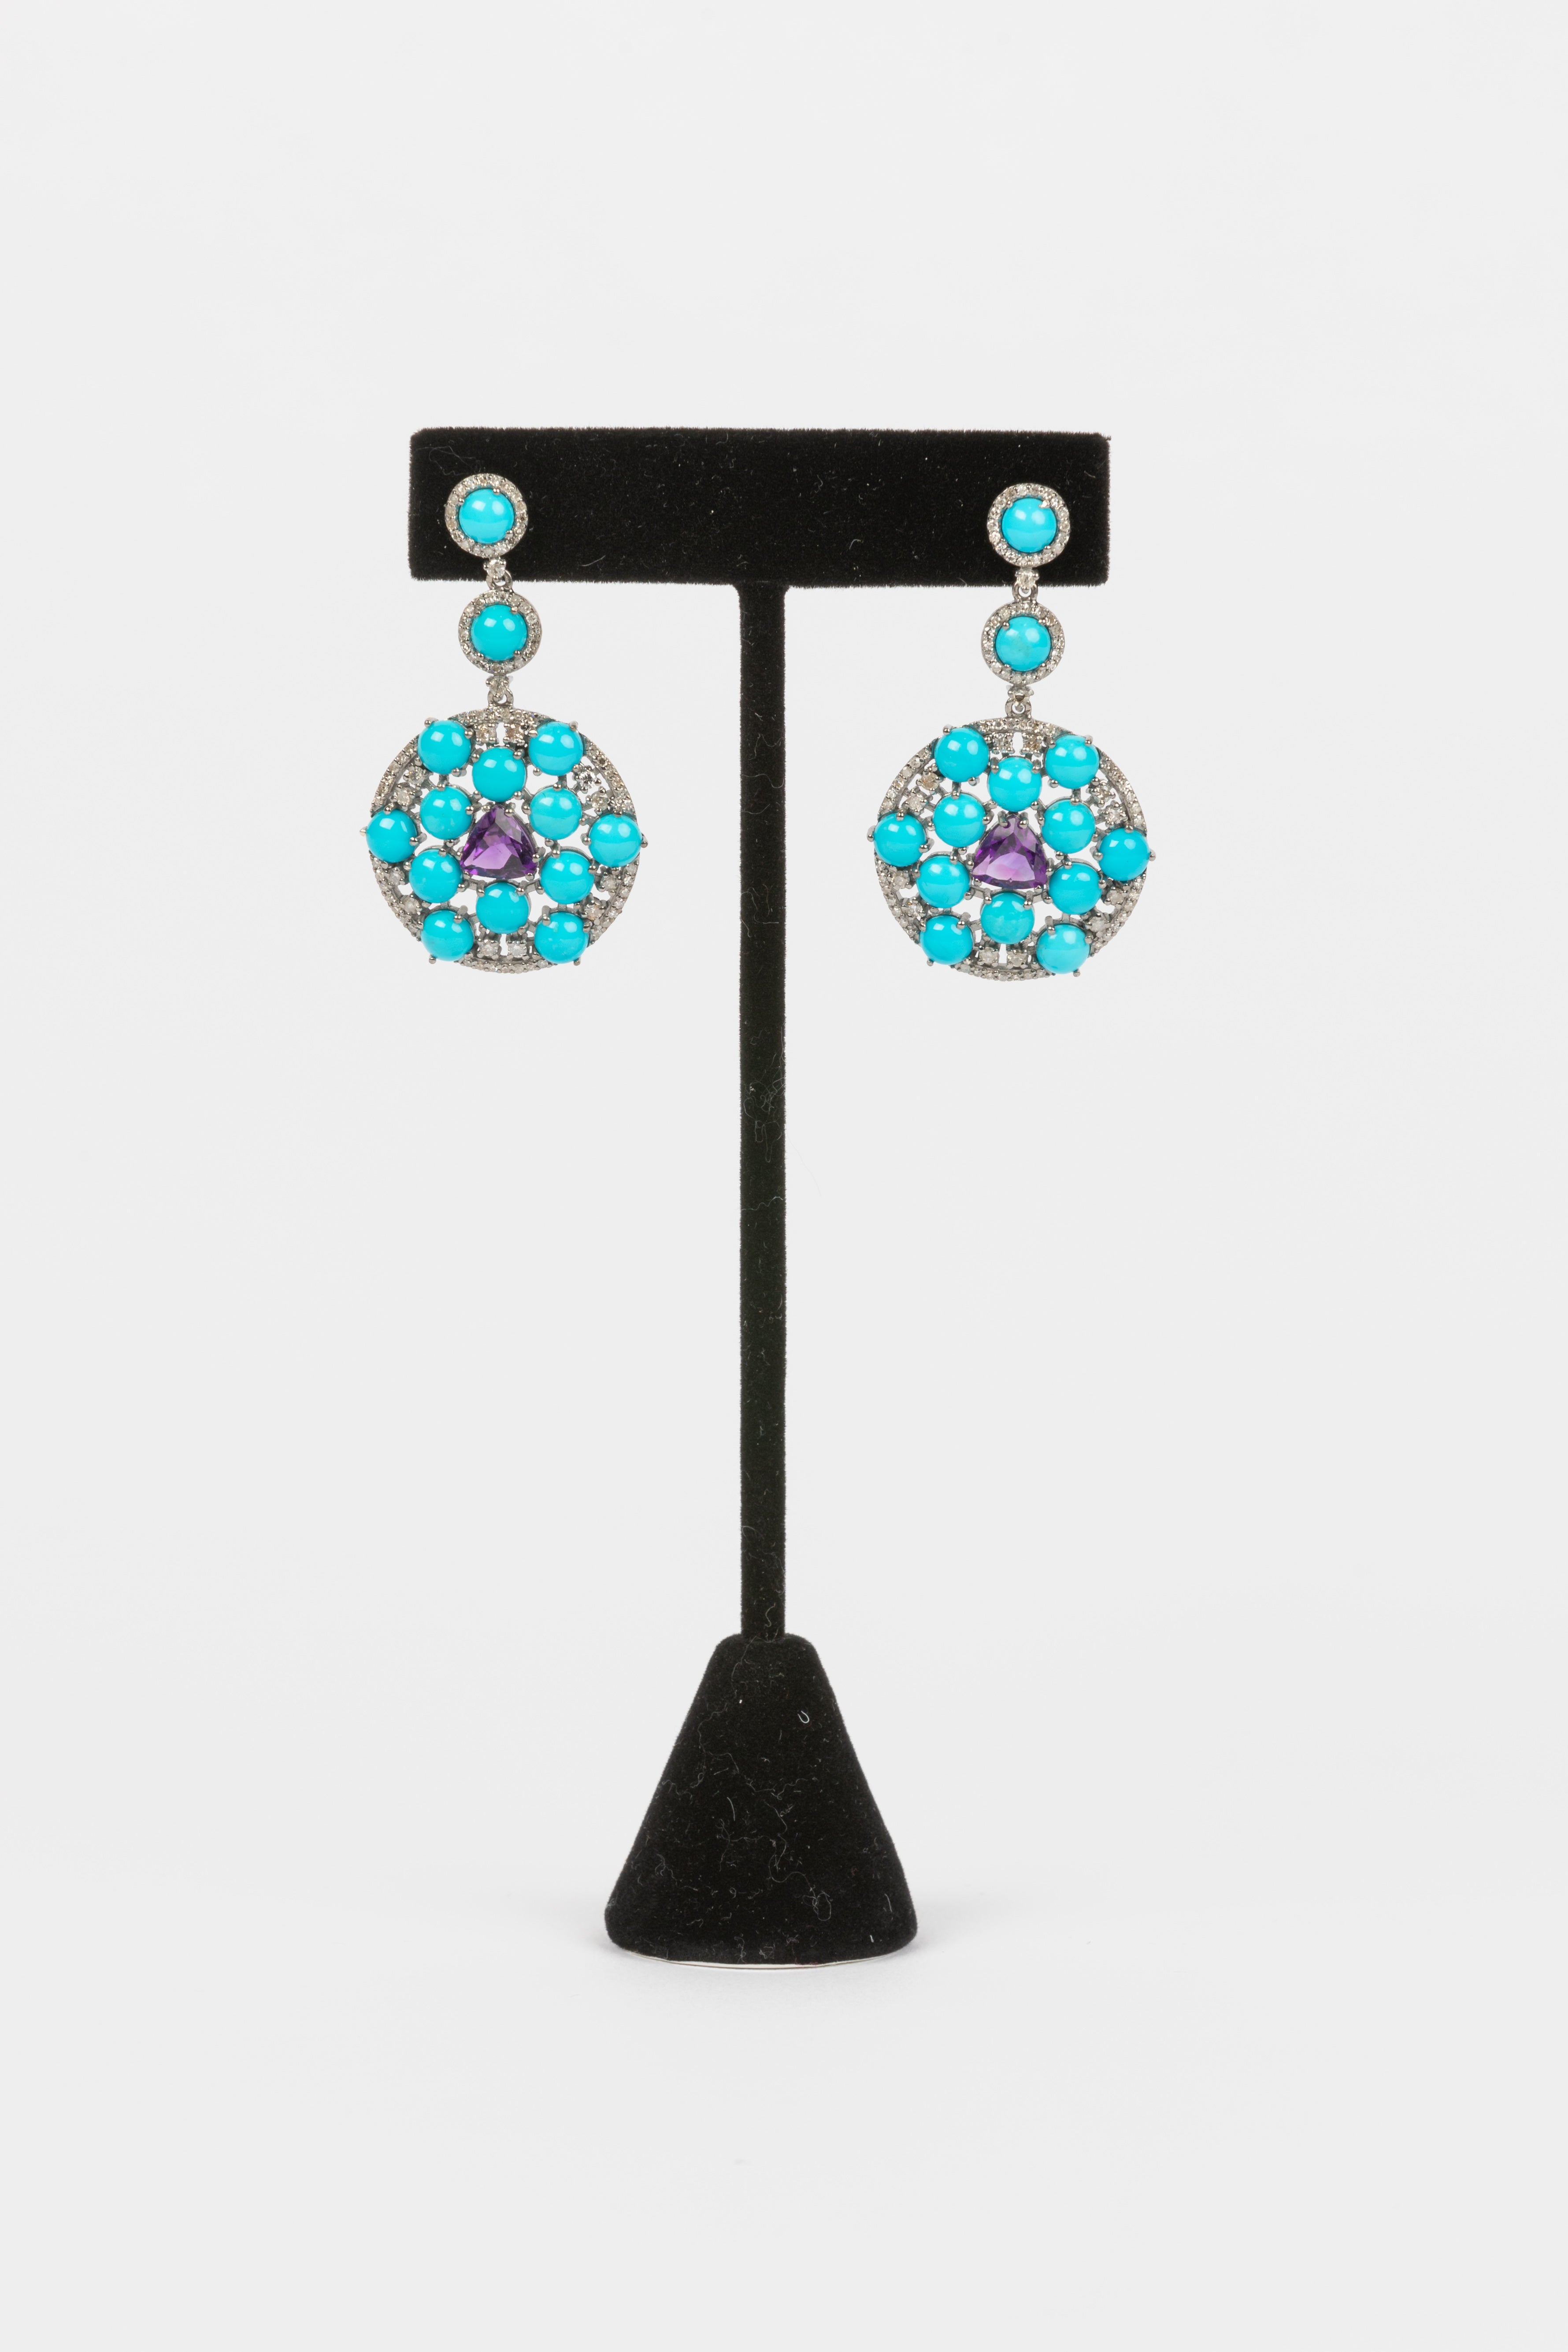 Pave Diamond, Turquoise and Amethyst Earrings